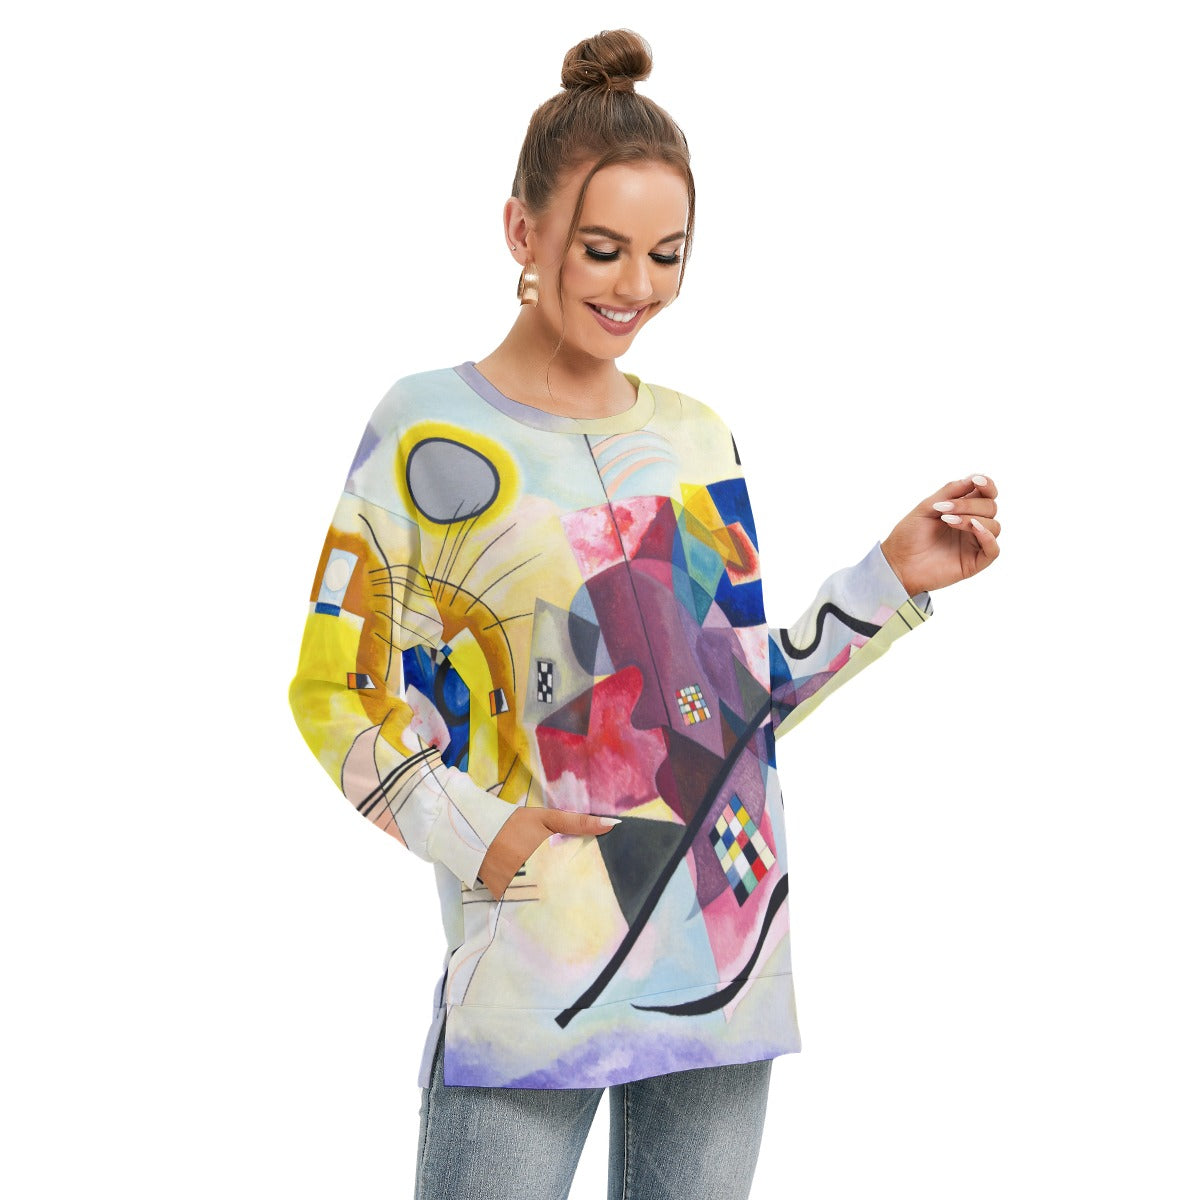 Women's Fashion Apparel with Vibrant Colors